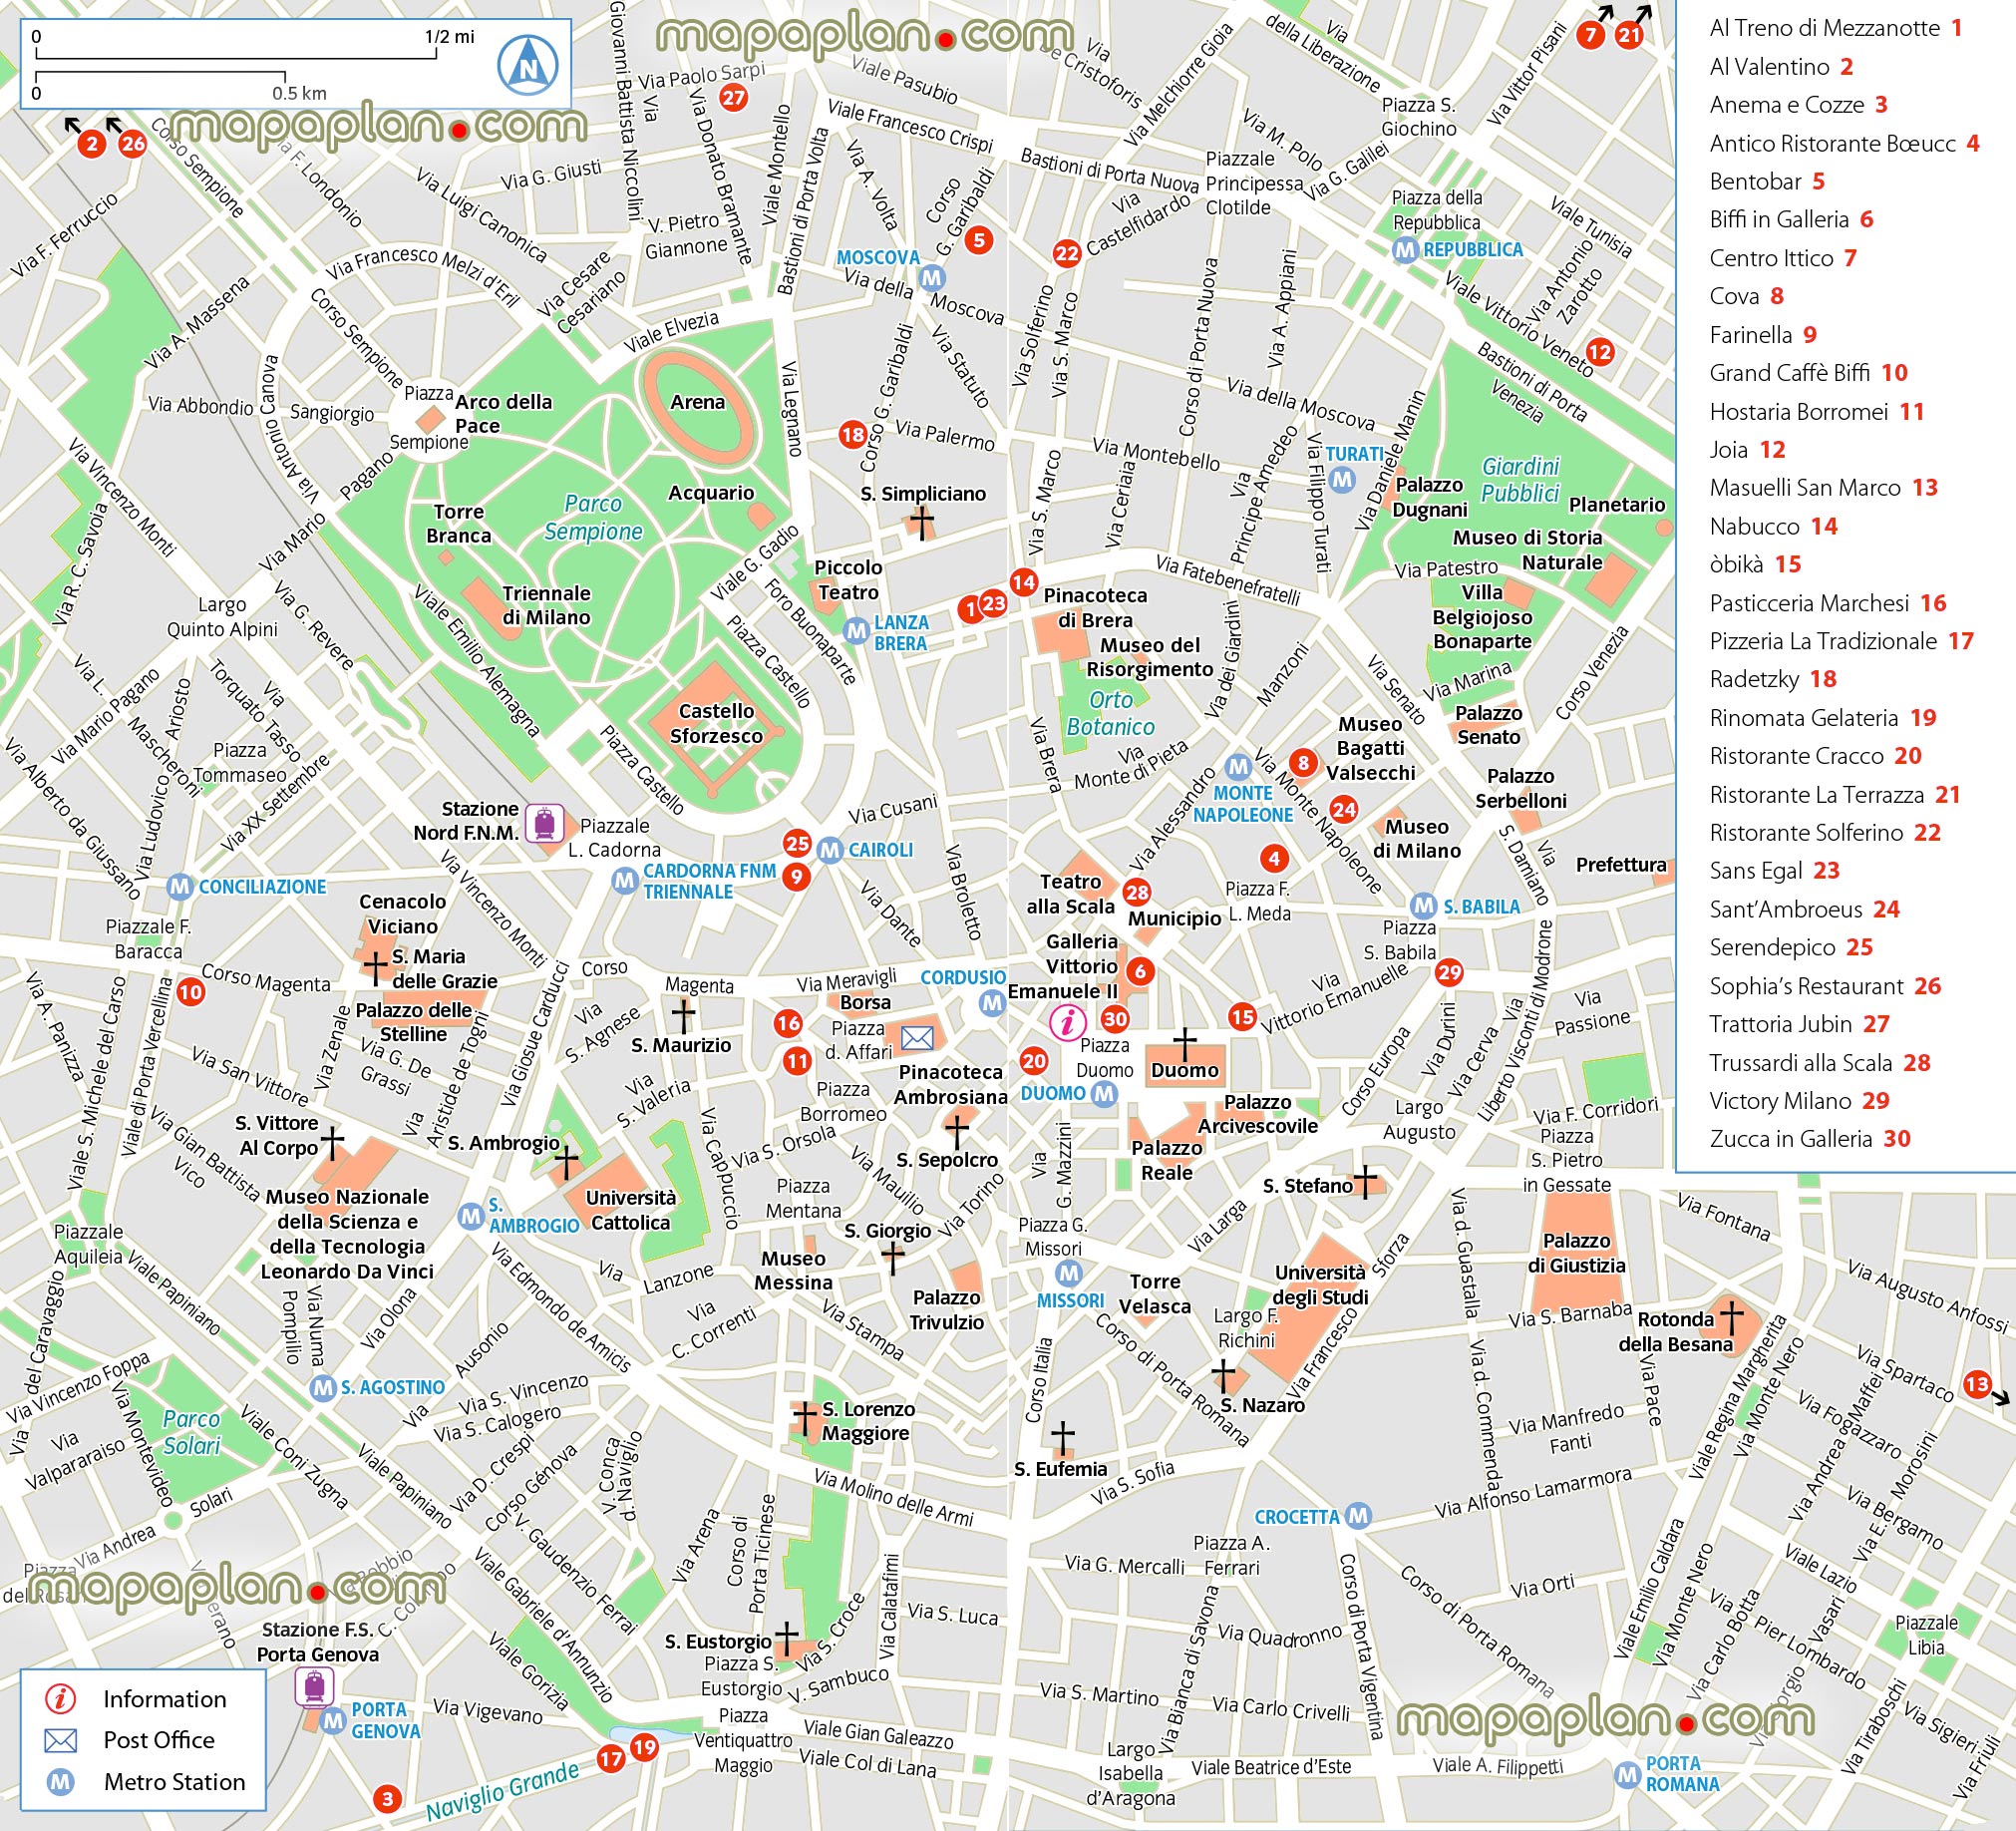 Milan best restaurants dining central district area outline layout best locations visits Milan Top tourist attractions map